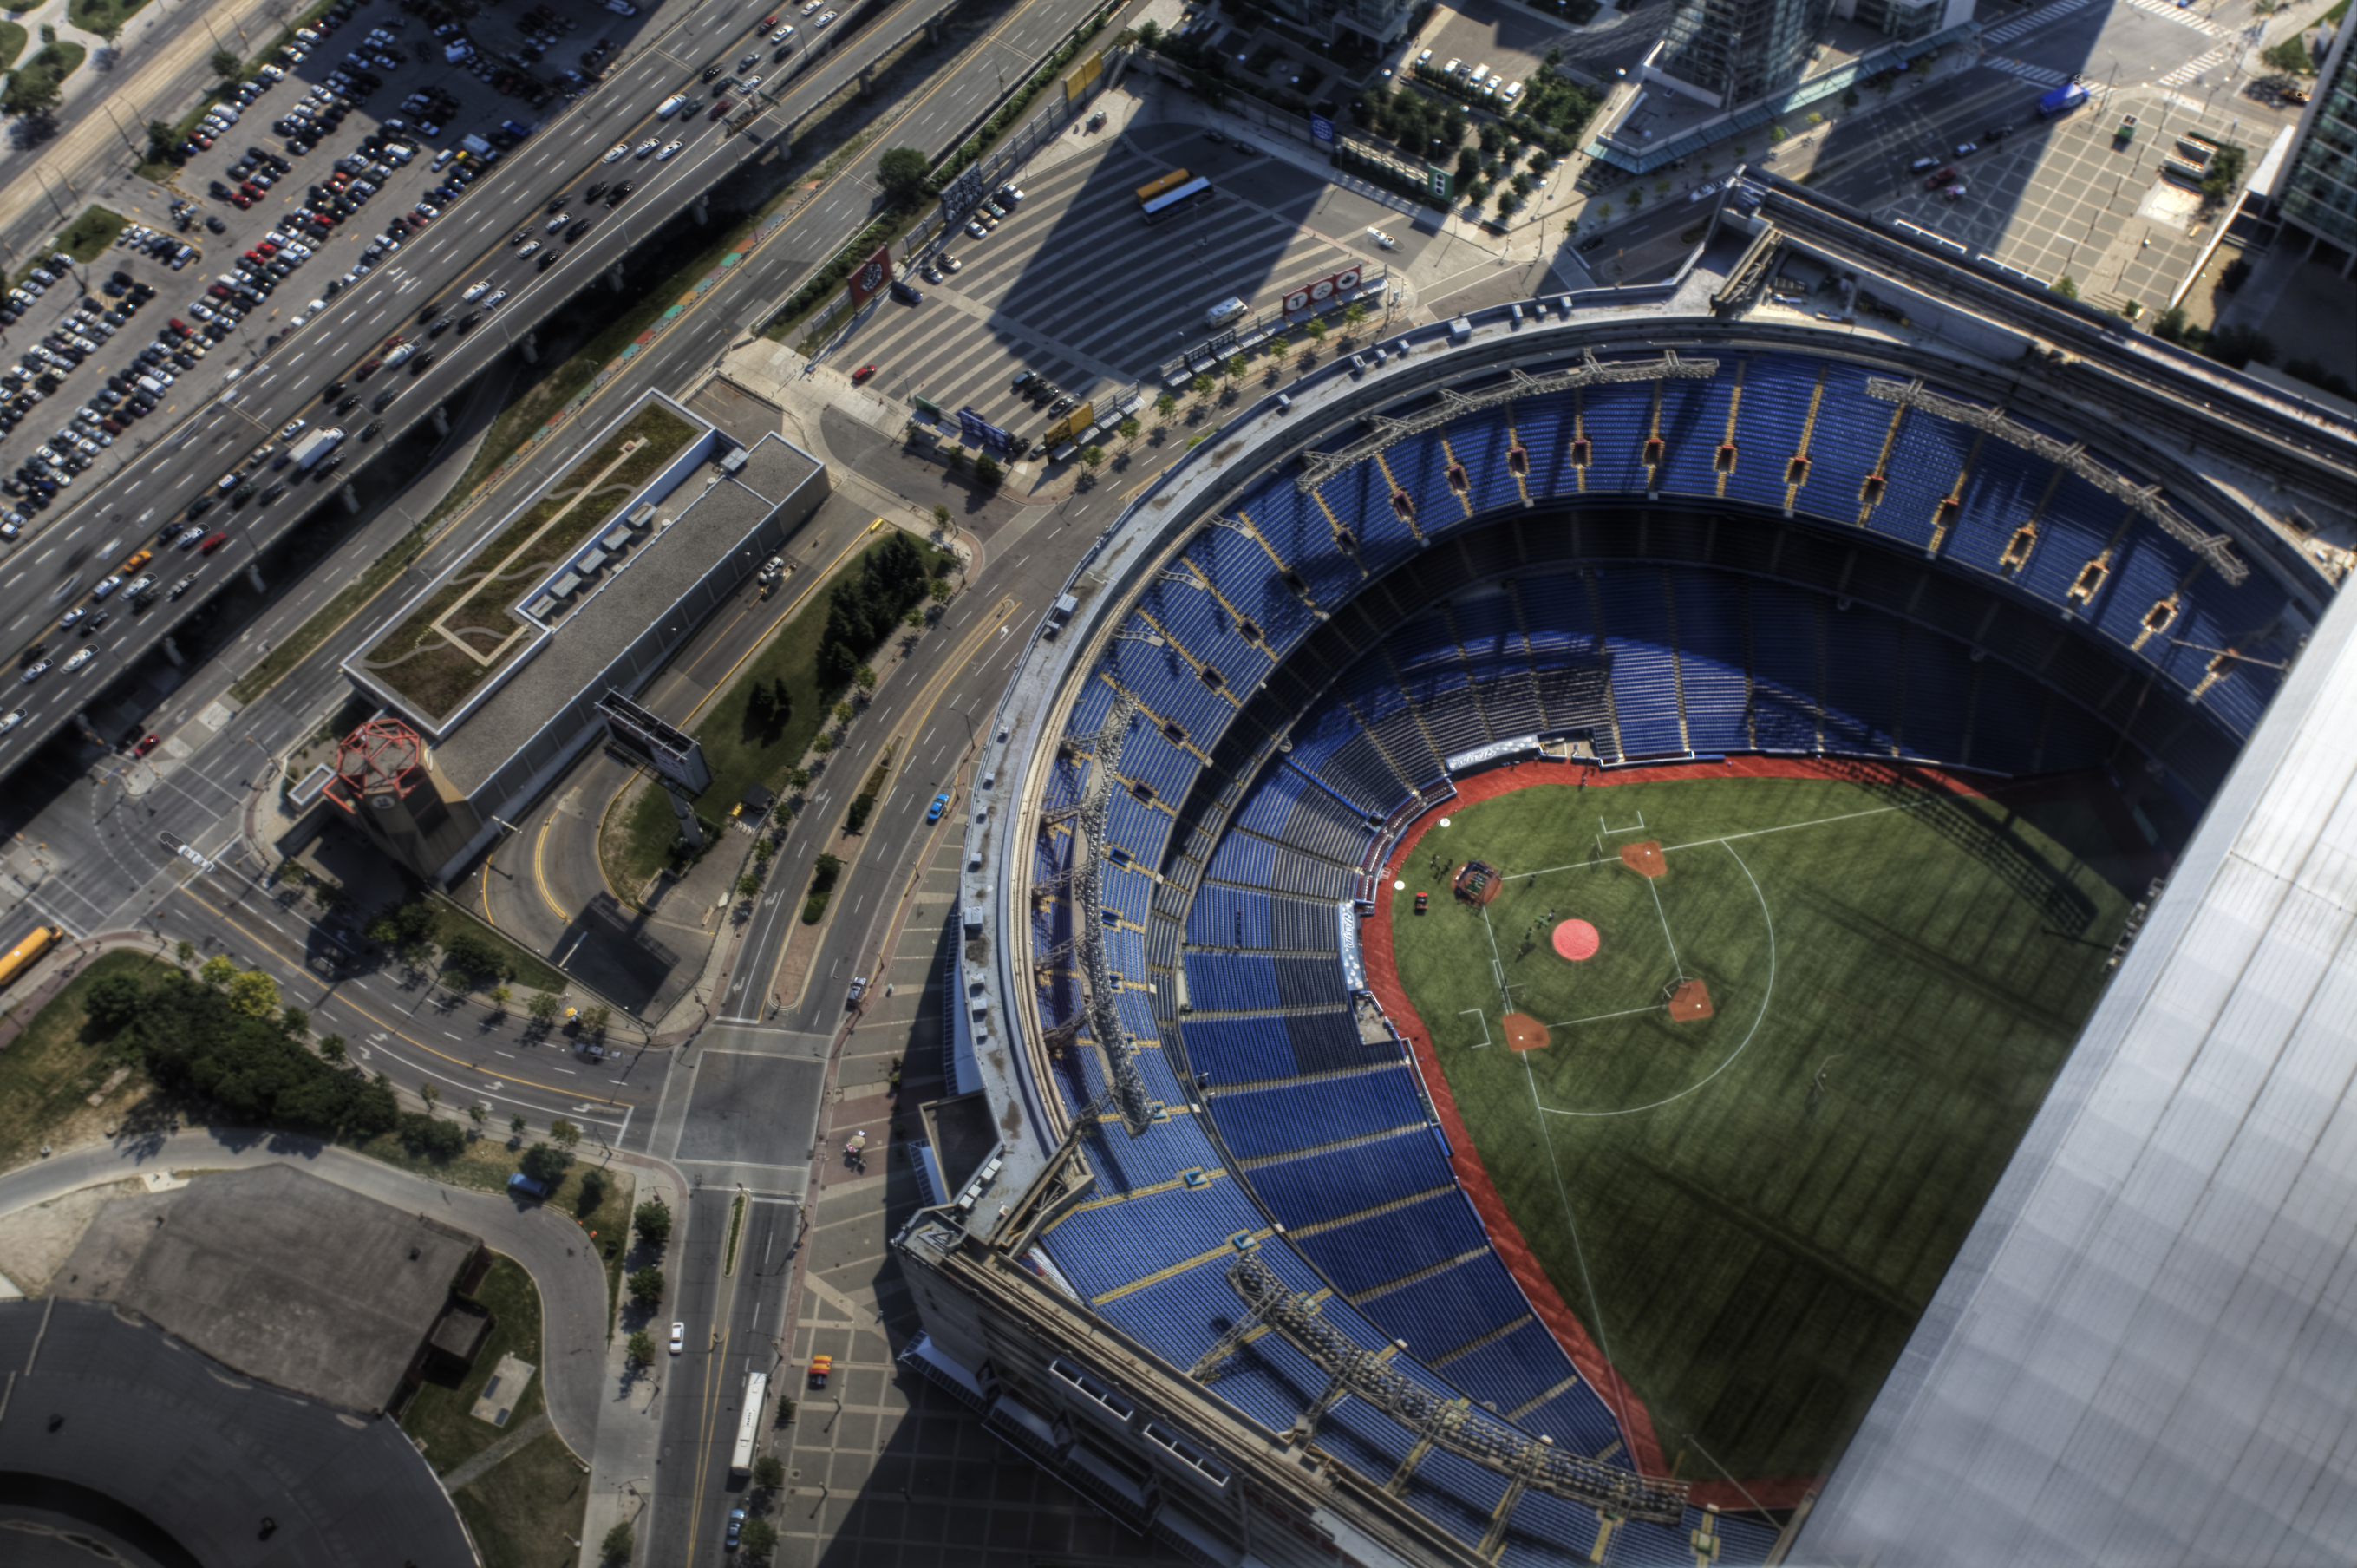 Toronto, Canada - July 27, 2010: An aerial view of the Rogers Center in Toronto, Canada. The stadium houses the Toronto Blue Jays and was opened in 1989.